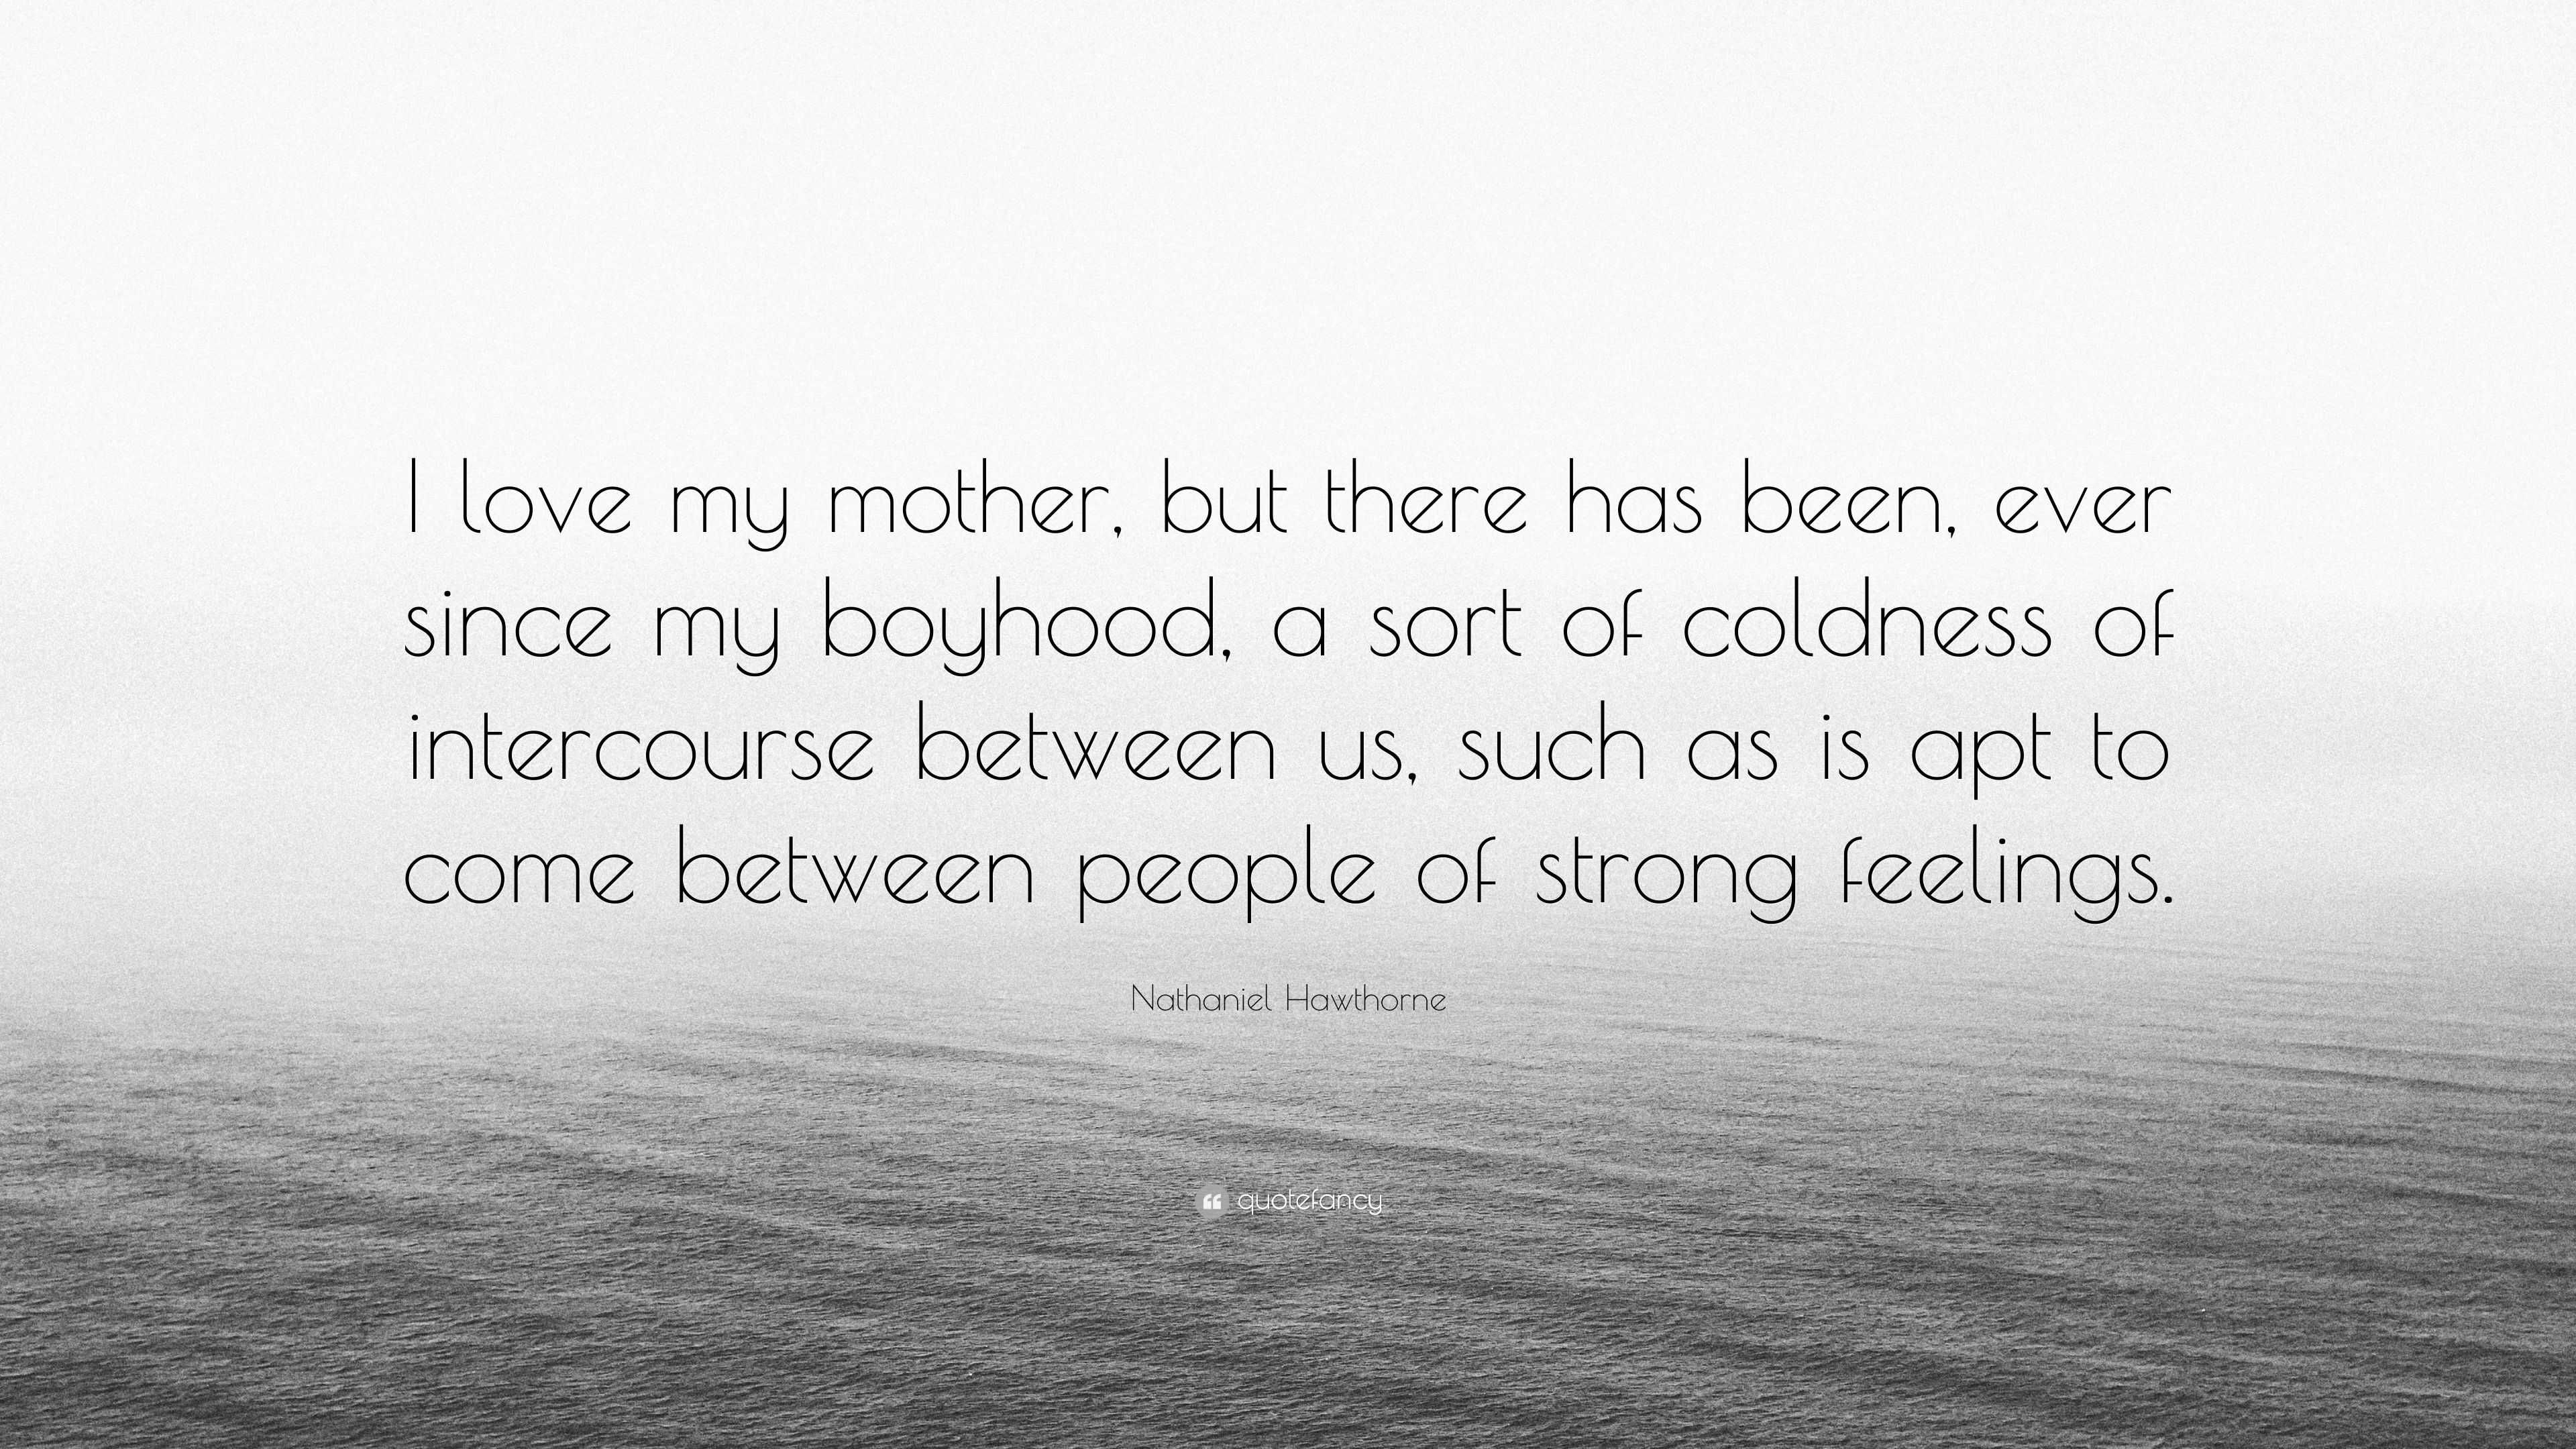 Nathaniel Hawthorne Quote “I love my mother but there has been ever